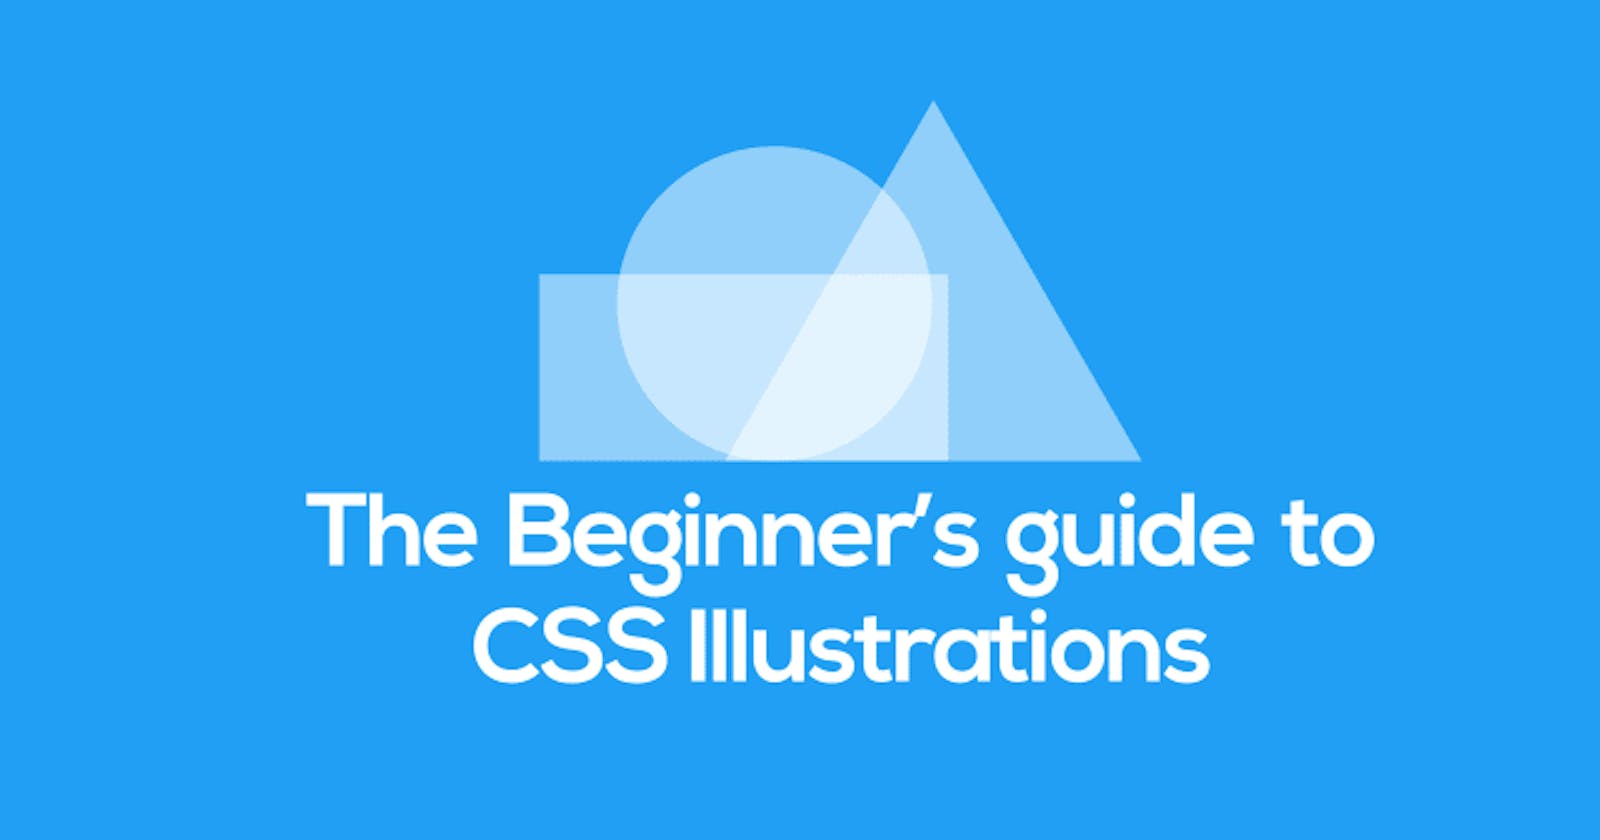 The Beginner's guide to CSS Illustrations - Part 2